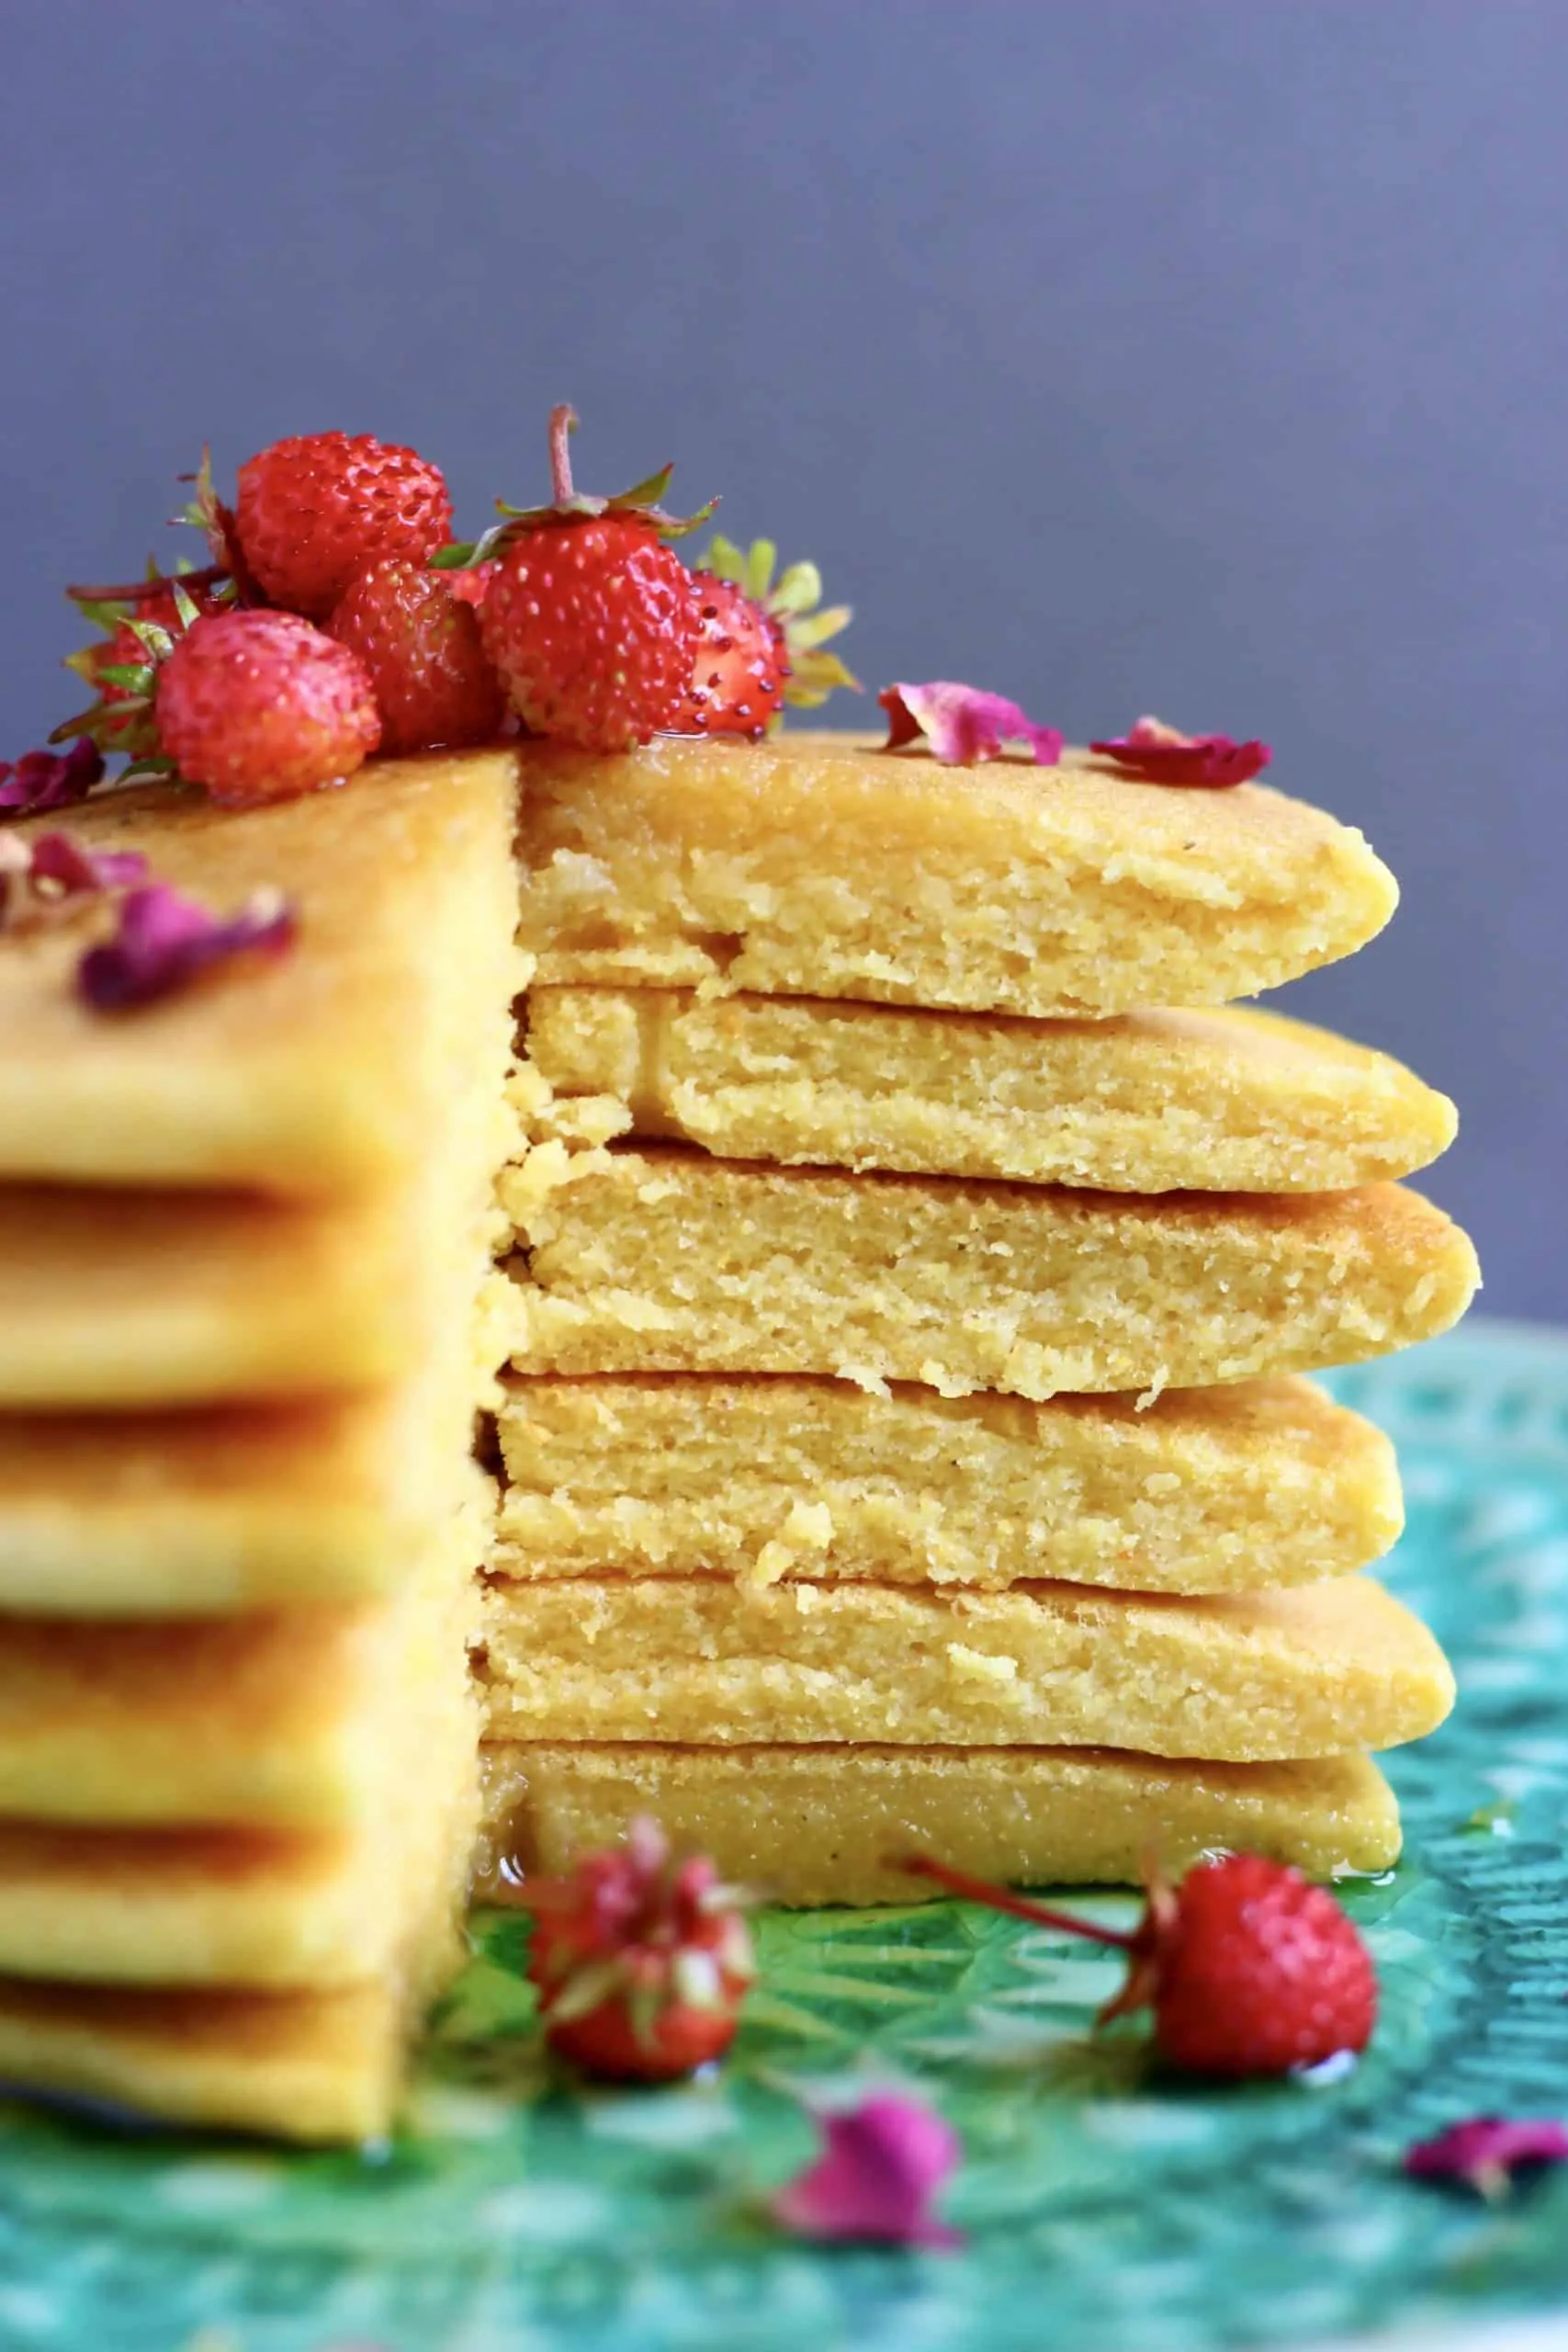 A stack of cornmeal pancakes with a slice cut out of them topped with rose petals and small strawberries on a green plate against a grey background